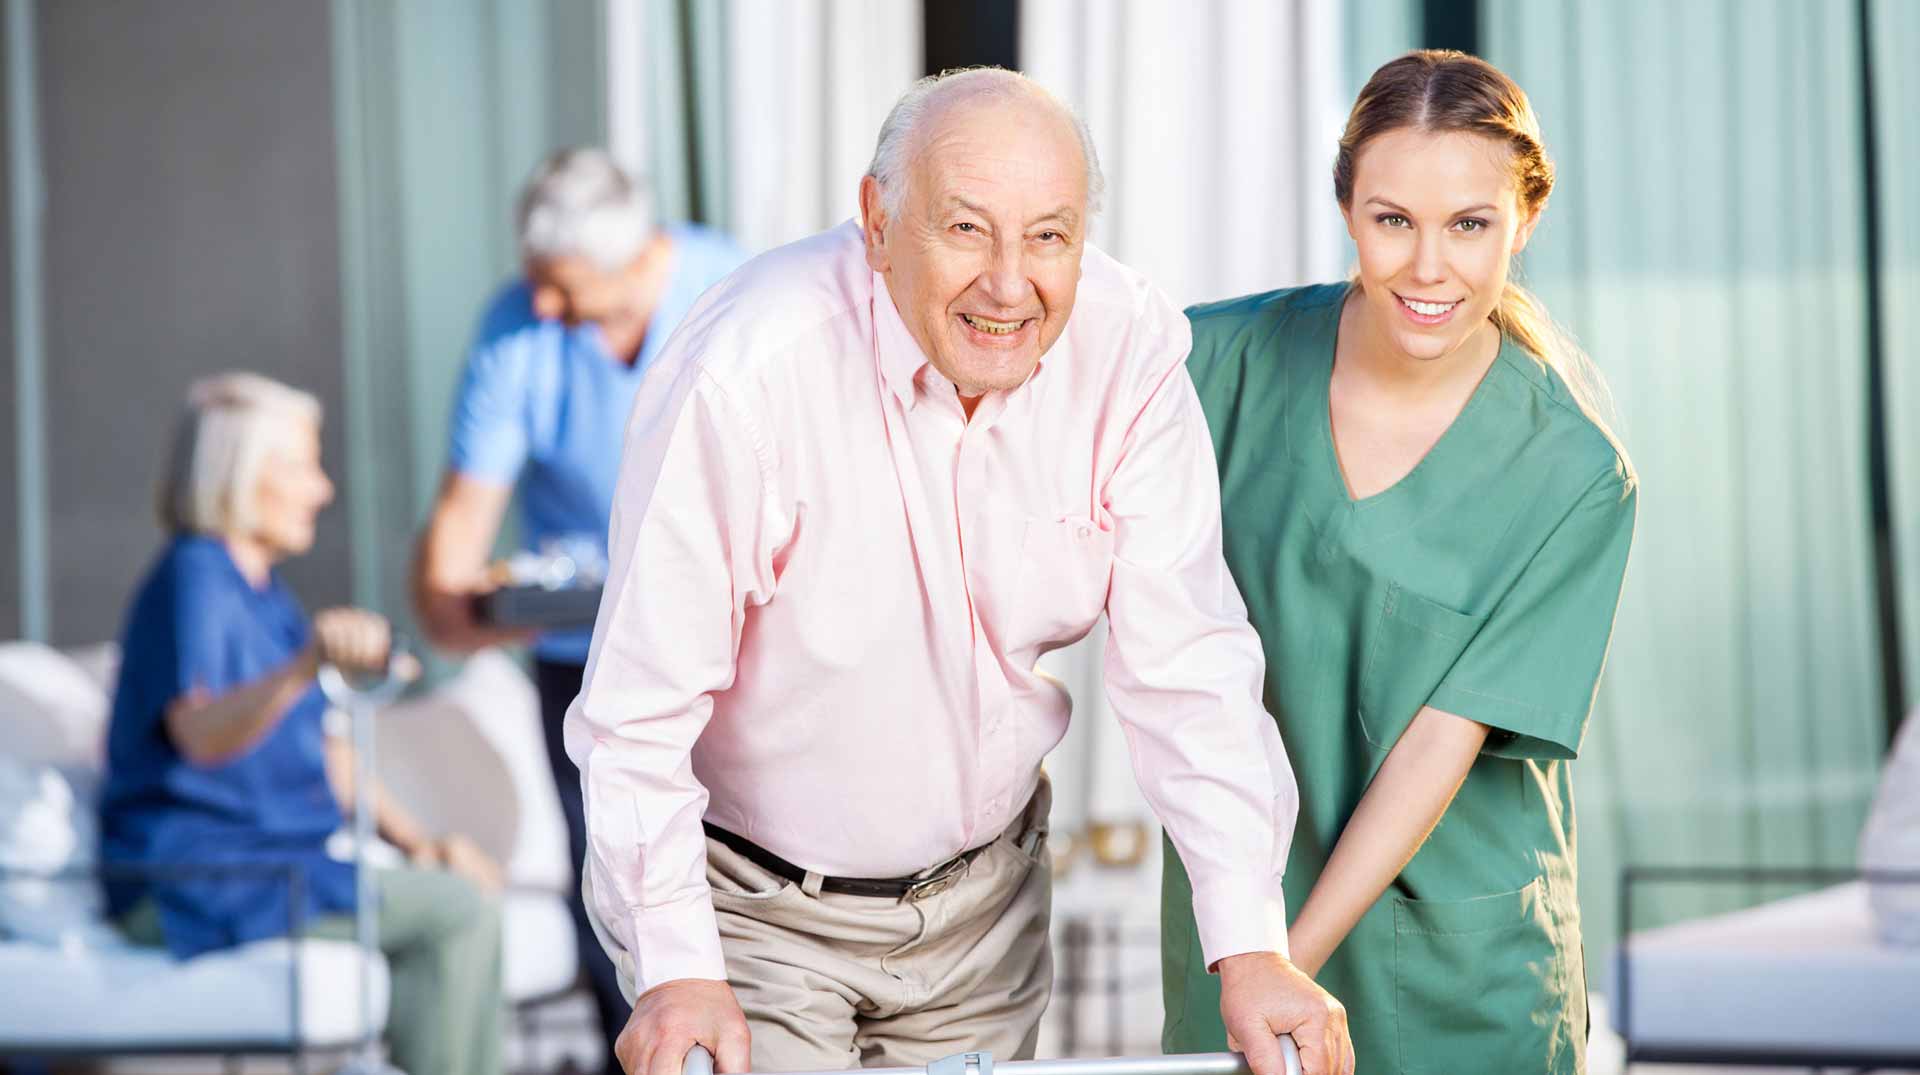 Respite care, health home care, caregiver selection for senior or elder care is frequently challenging. Home Care One has provided home care services from its Boca Raton office for elderly home care in Palm Beach County, Martin County, St. Lucie County, Okeechobee County and Indian River County.